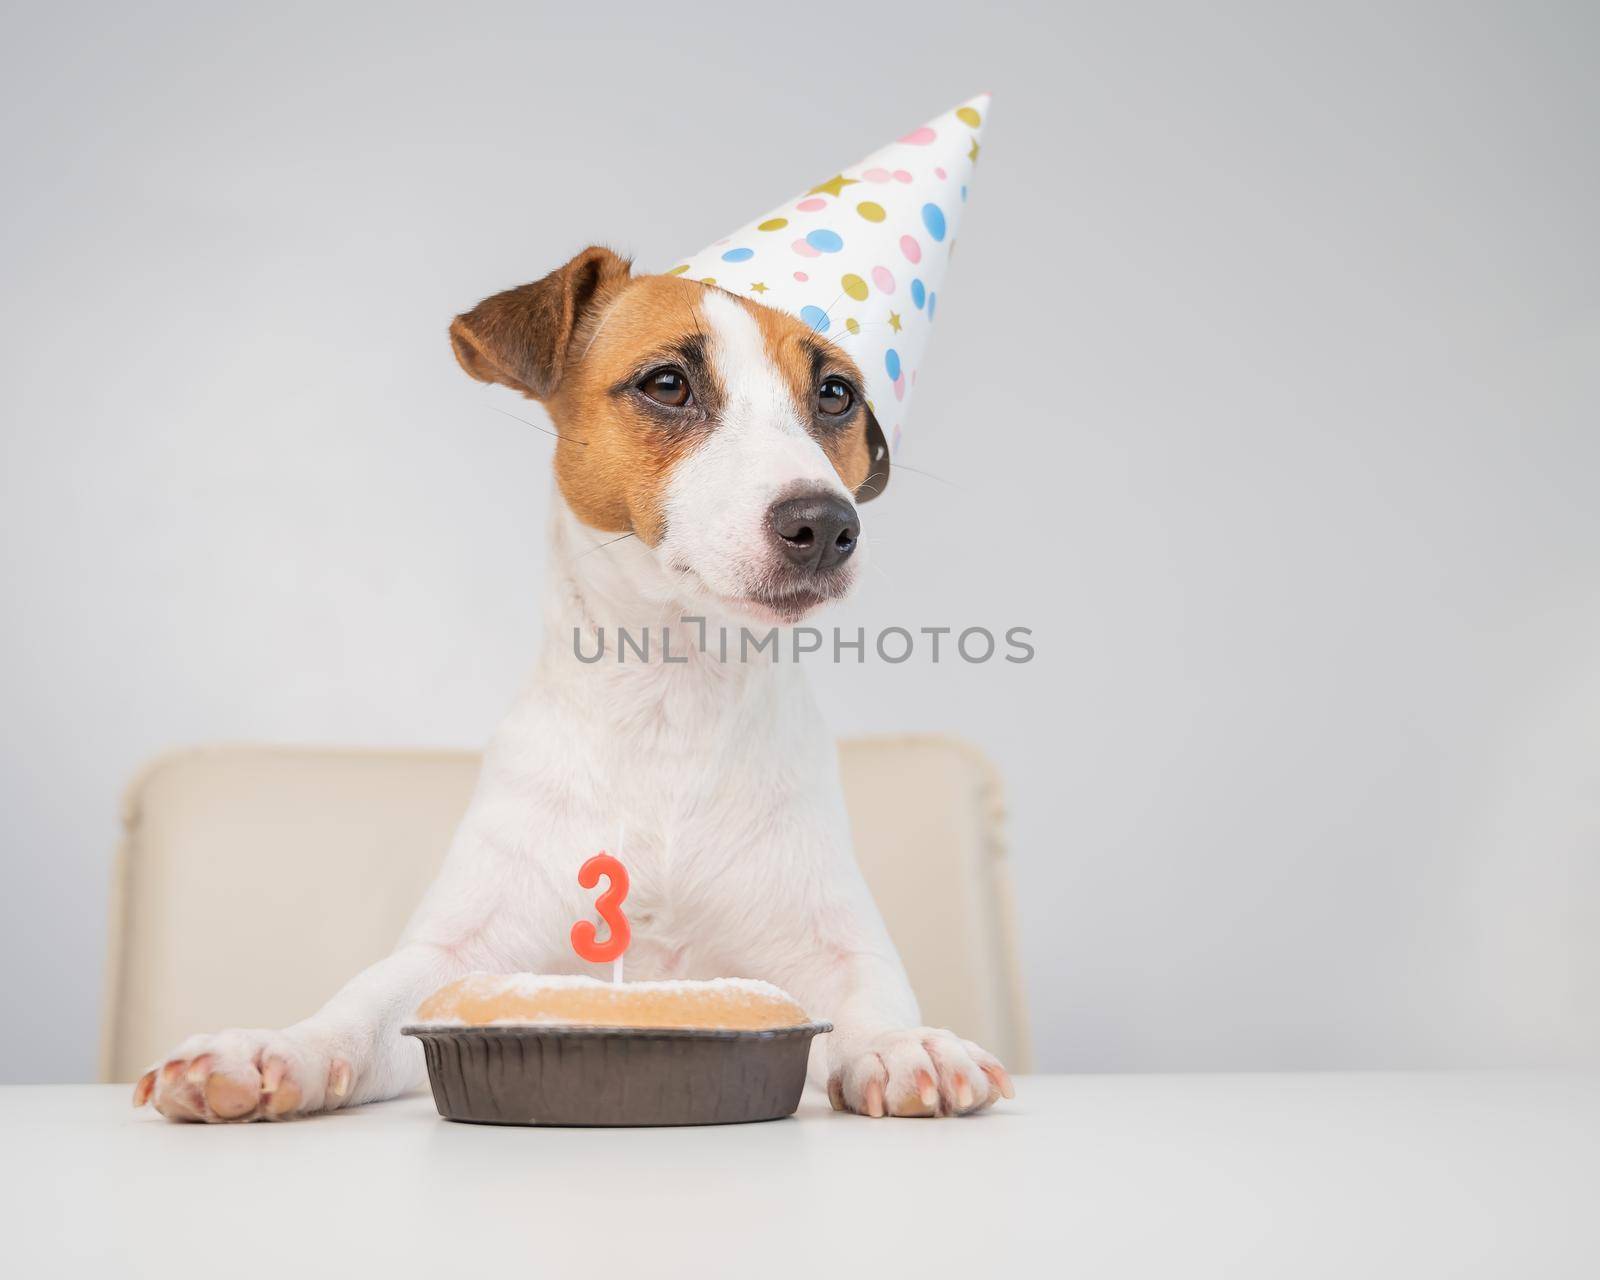 Jack russell terrier in a festive cap by a pie with a candle on a white background. The dog is celebrating its third birthday.